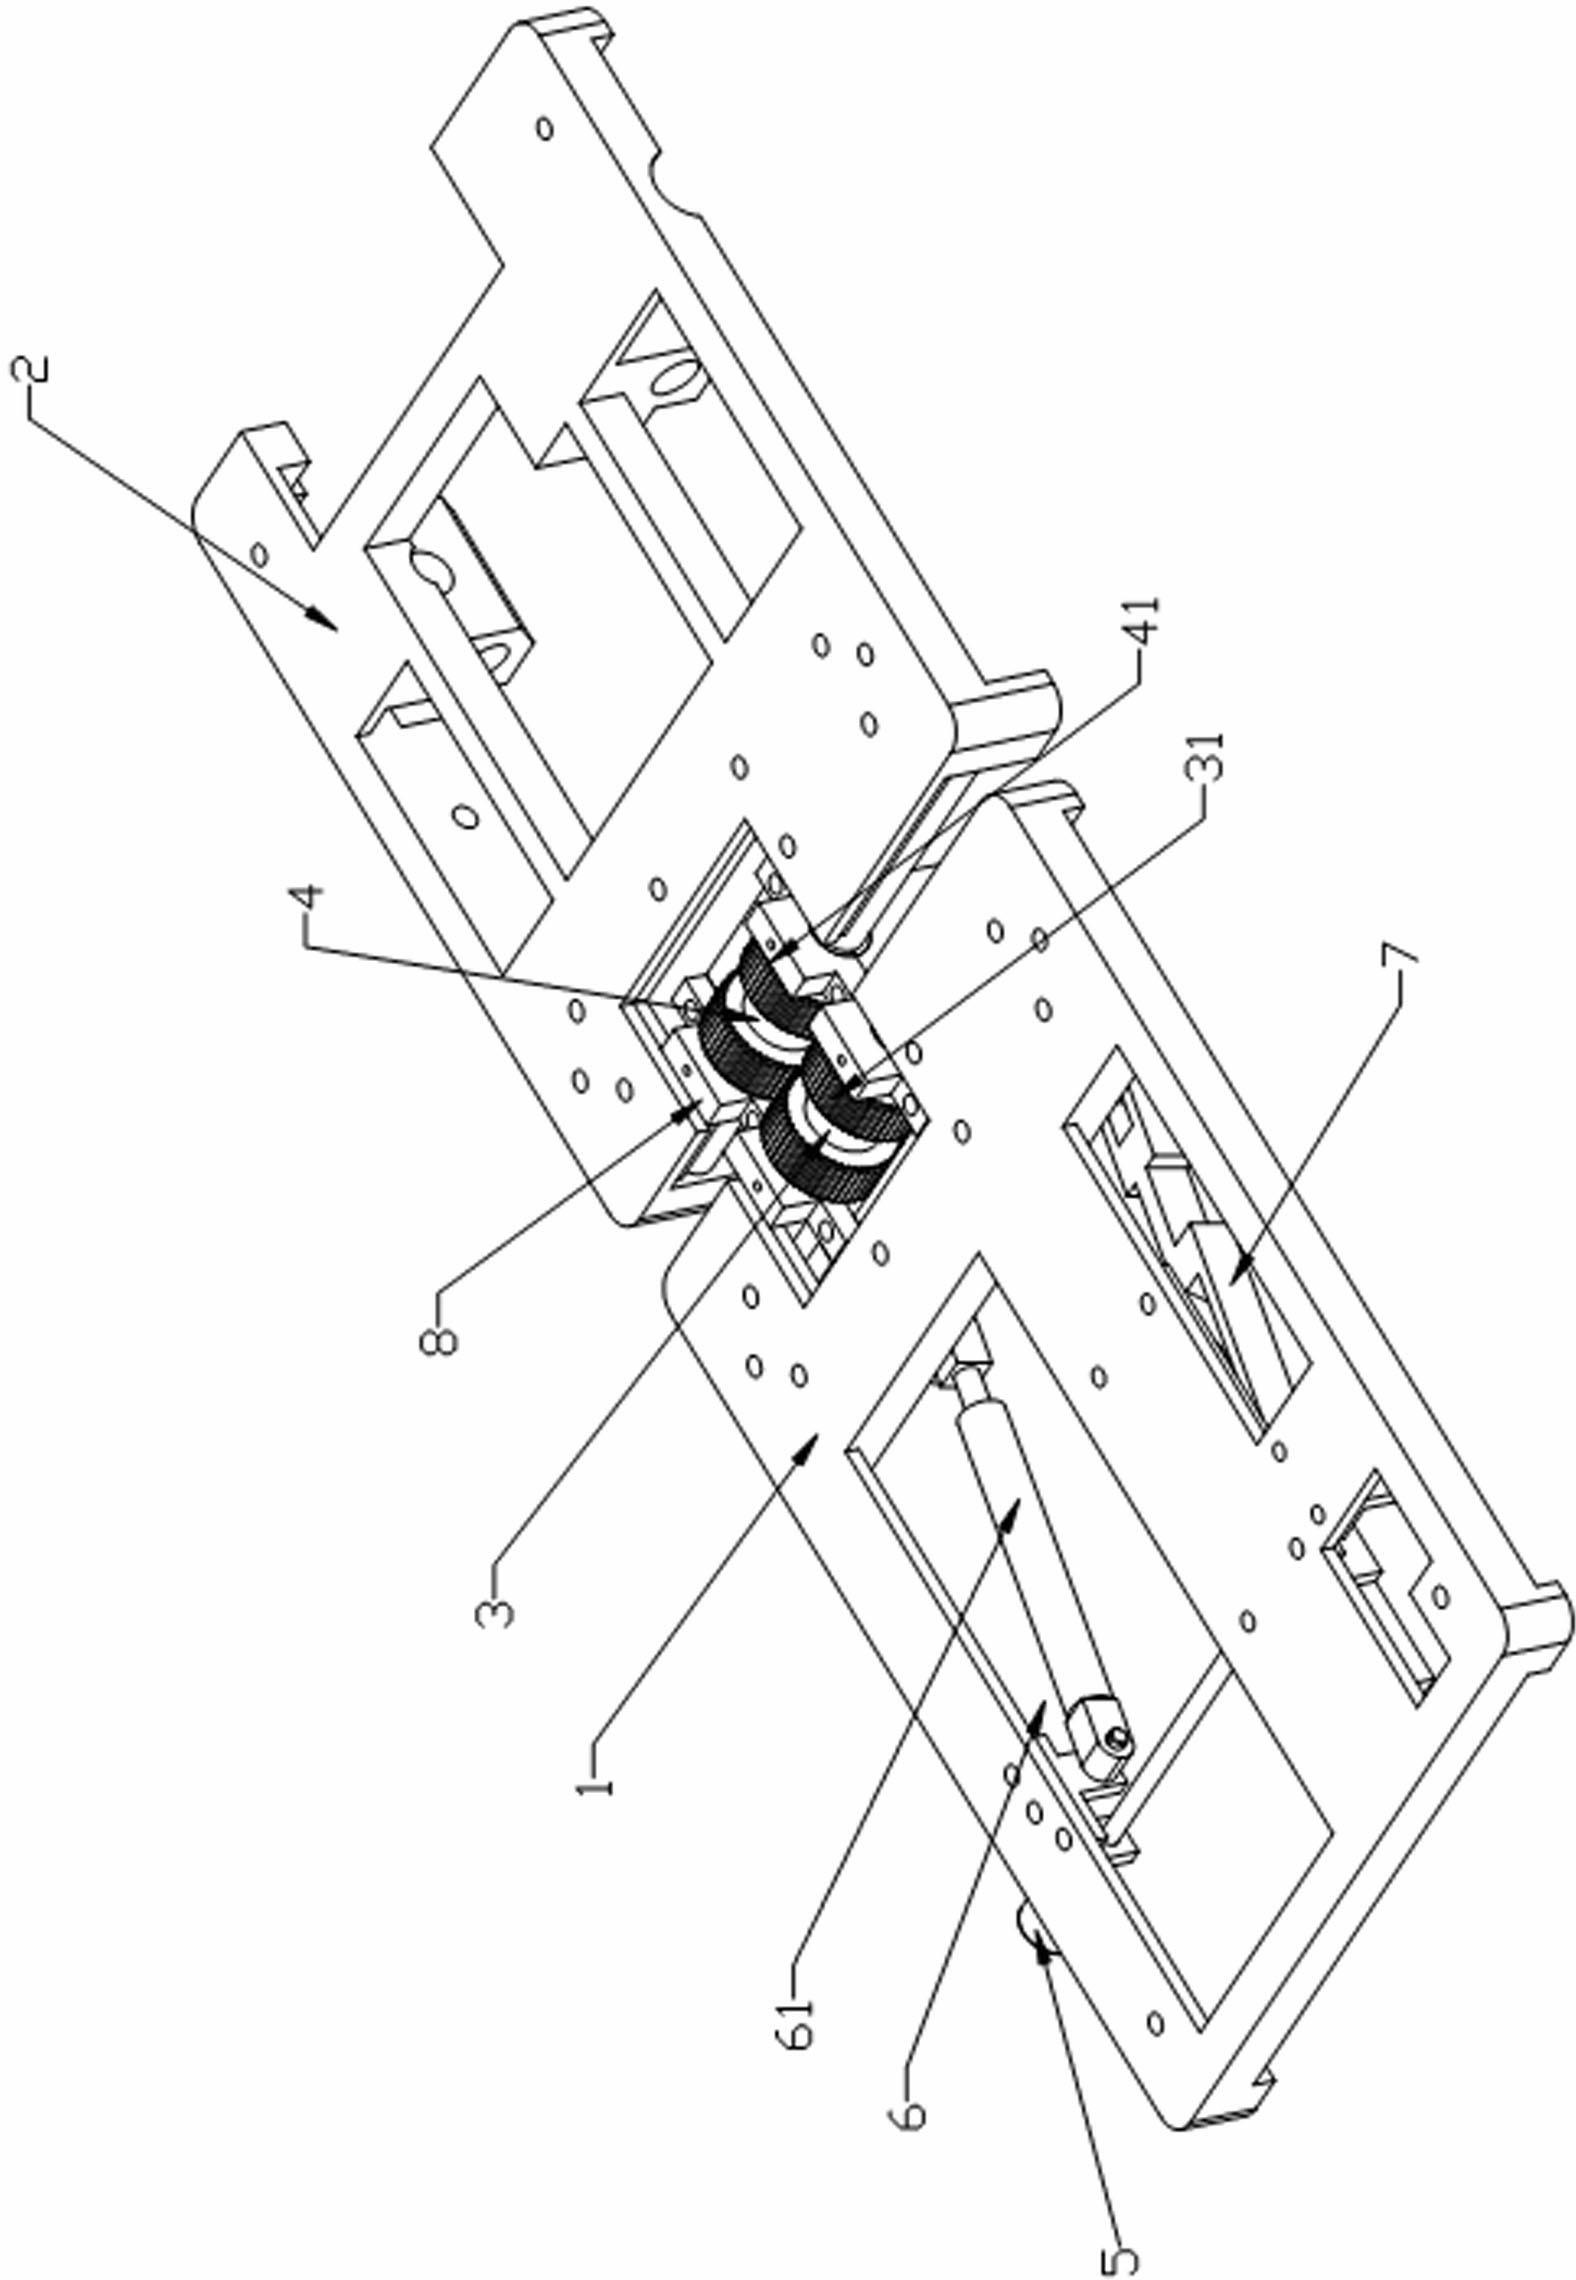 Leg plate turnover device for obstetric and sick bed in obstetric and gynecologic department